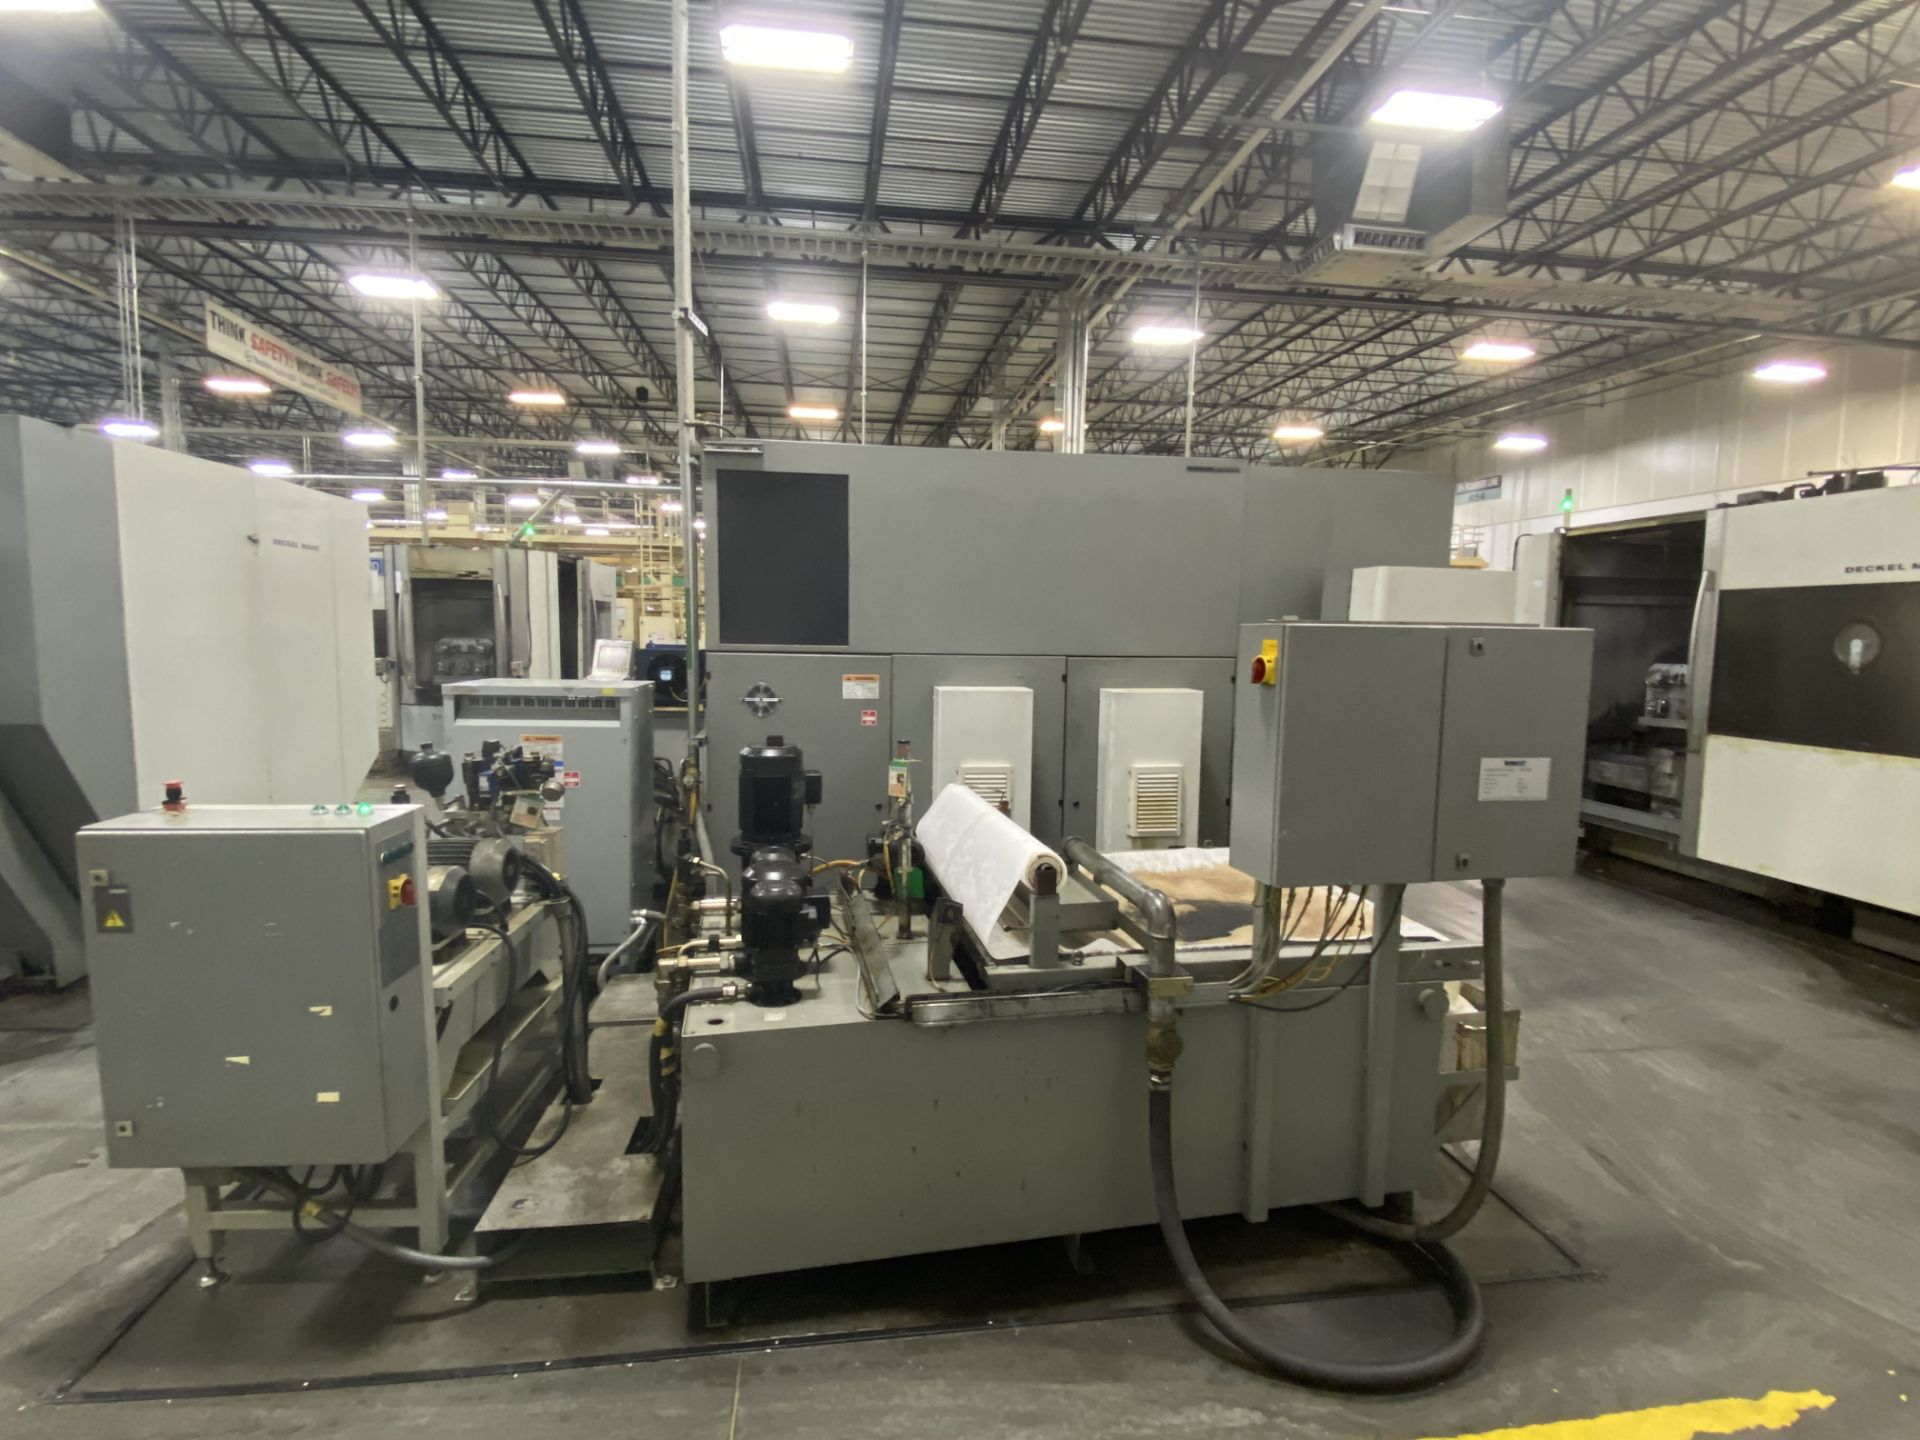 DMG 60T 5-Axis CNC Vertical Machining Center, S/N 1143-000061-3, 2004, with 25" x 20" Table, HSK - Image 4 of 17